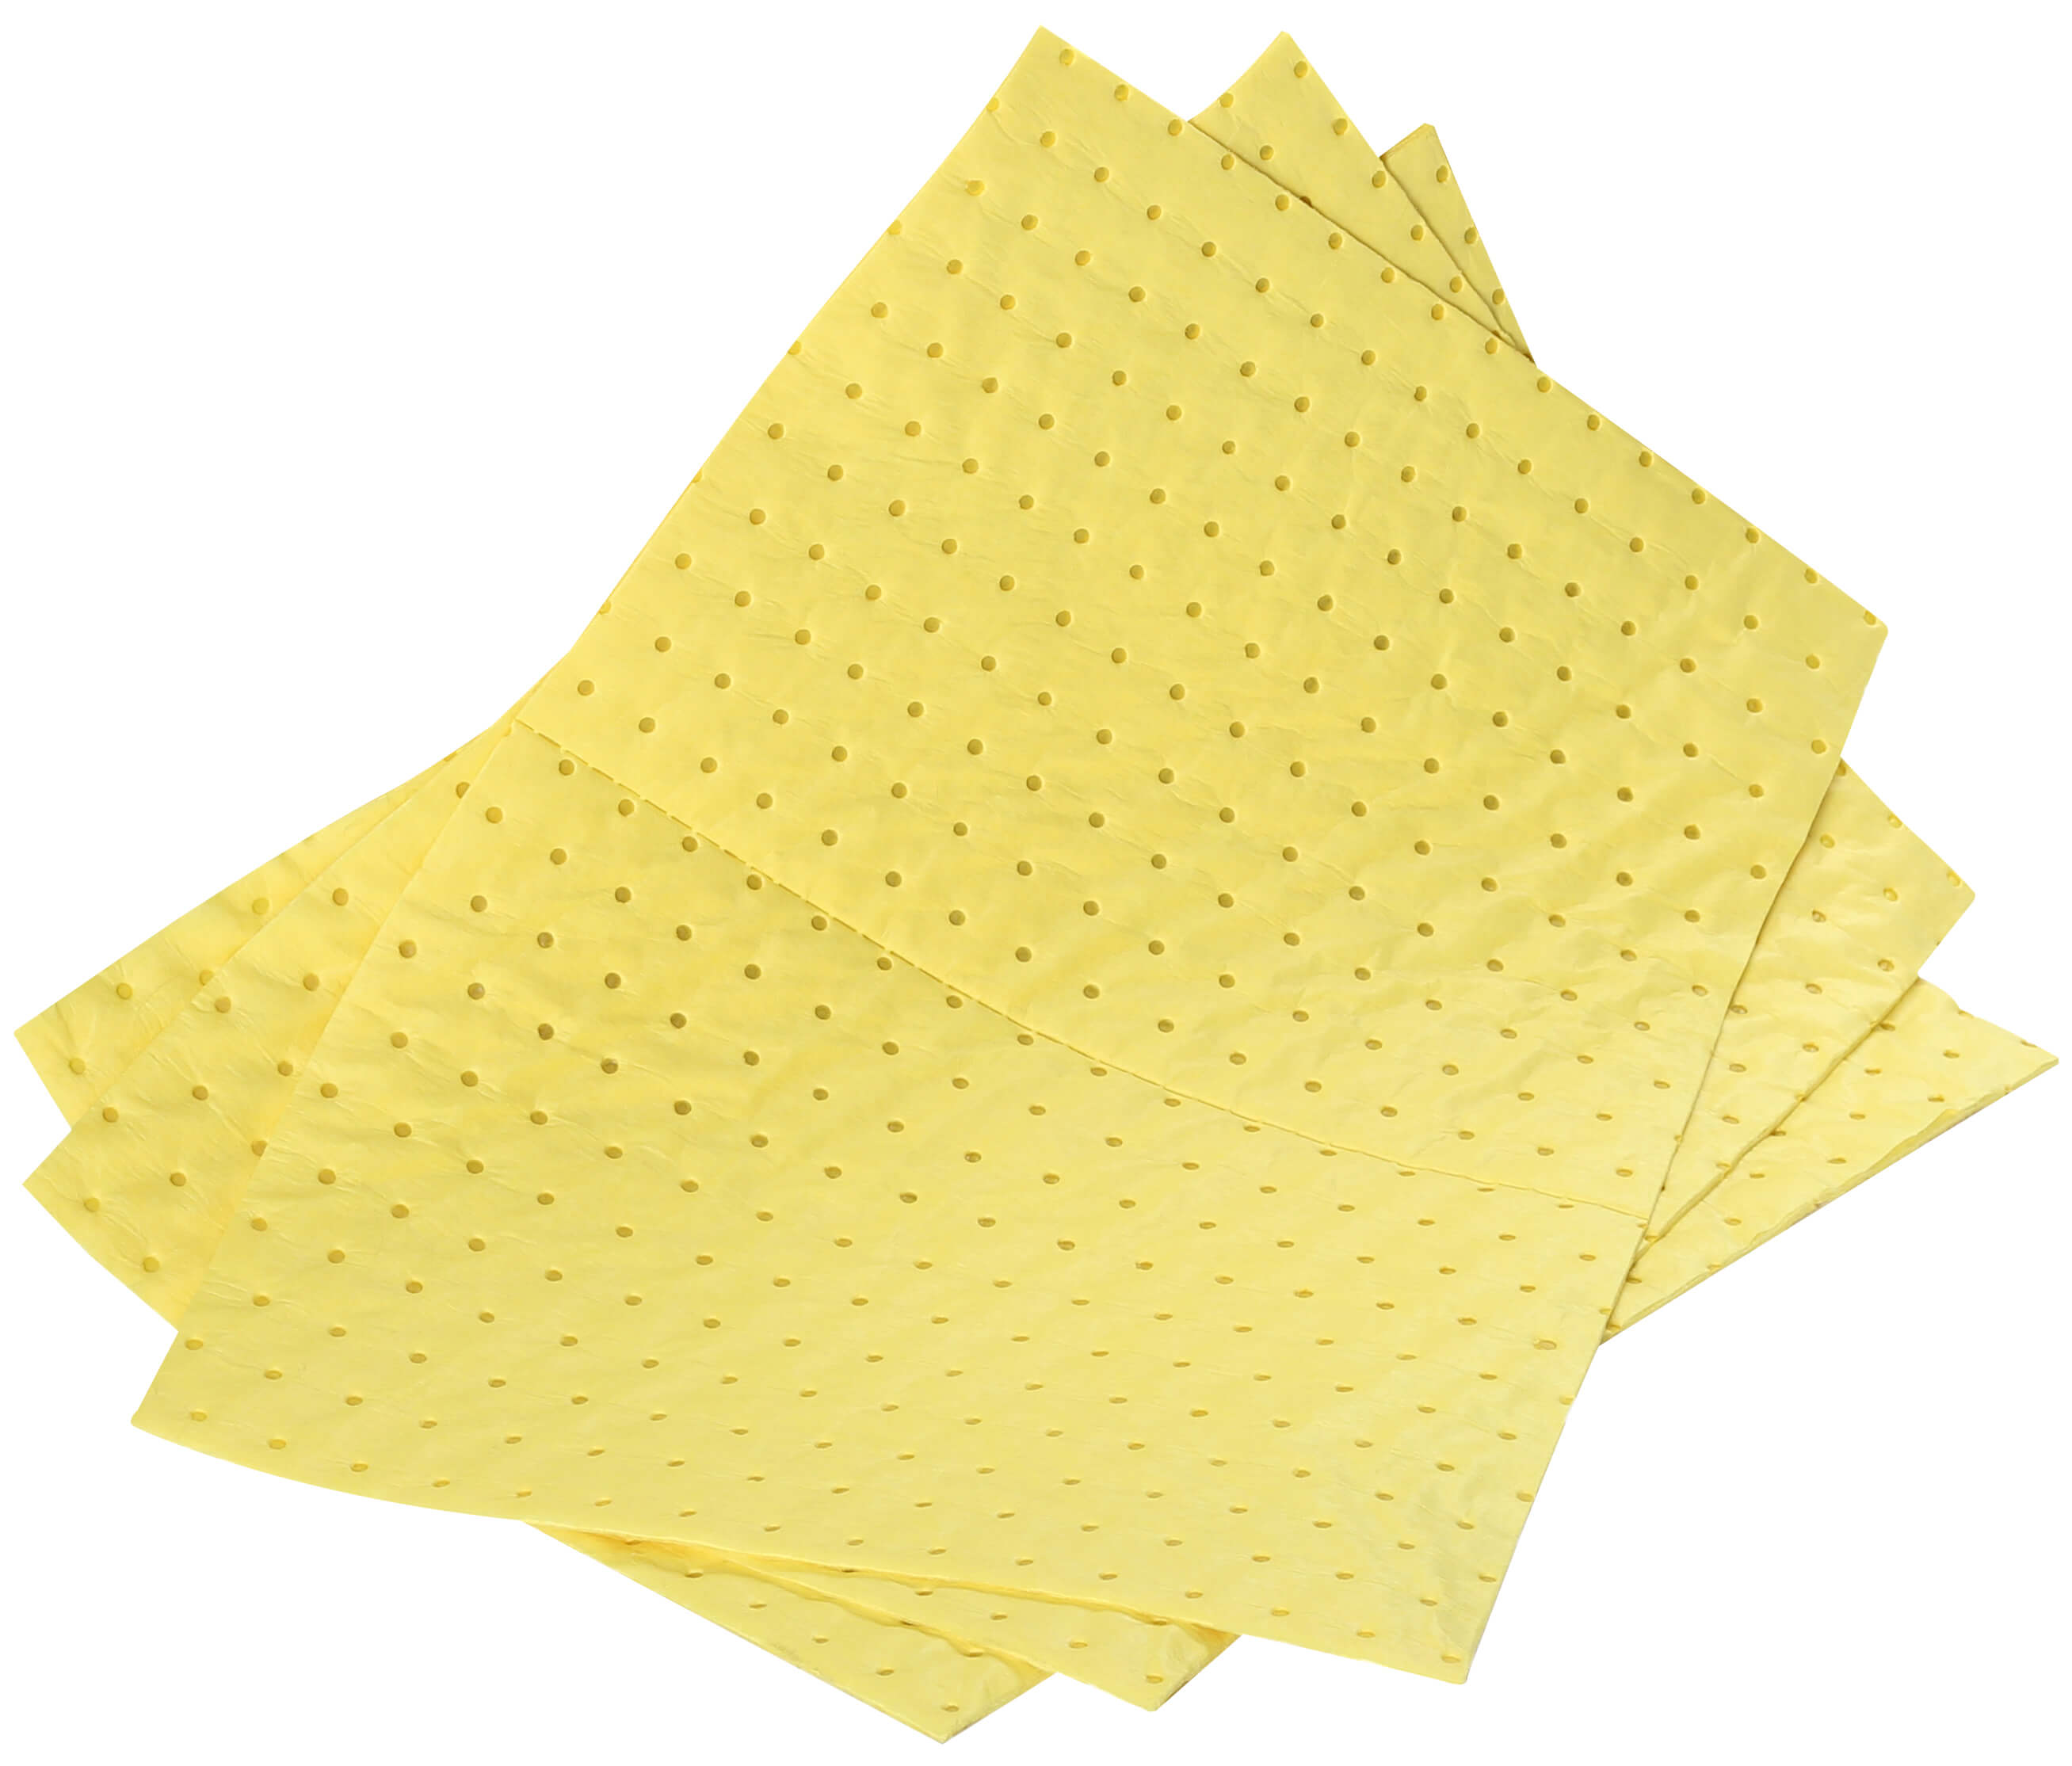 Premium Weight Chemical Absorbent Pads - Pack of 20